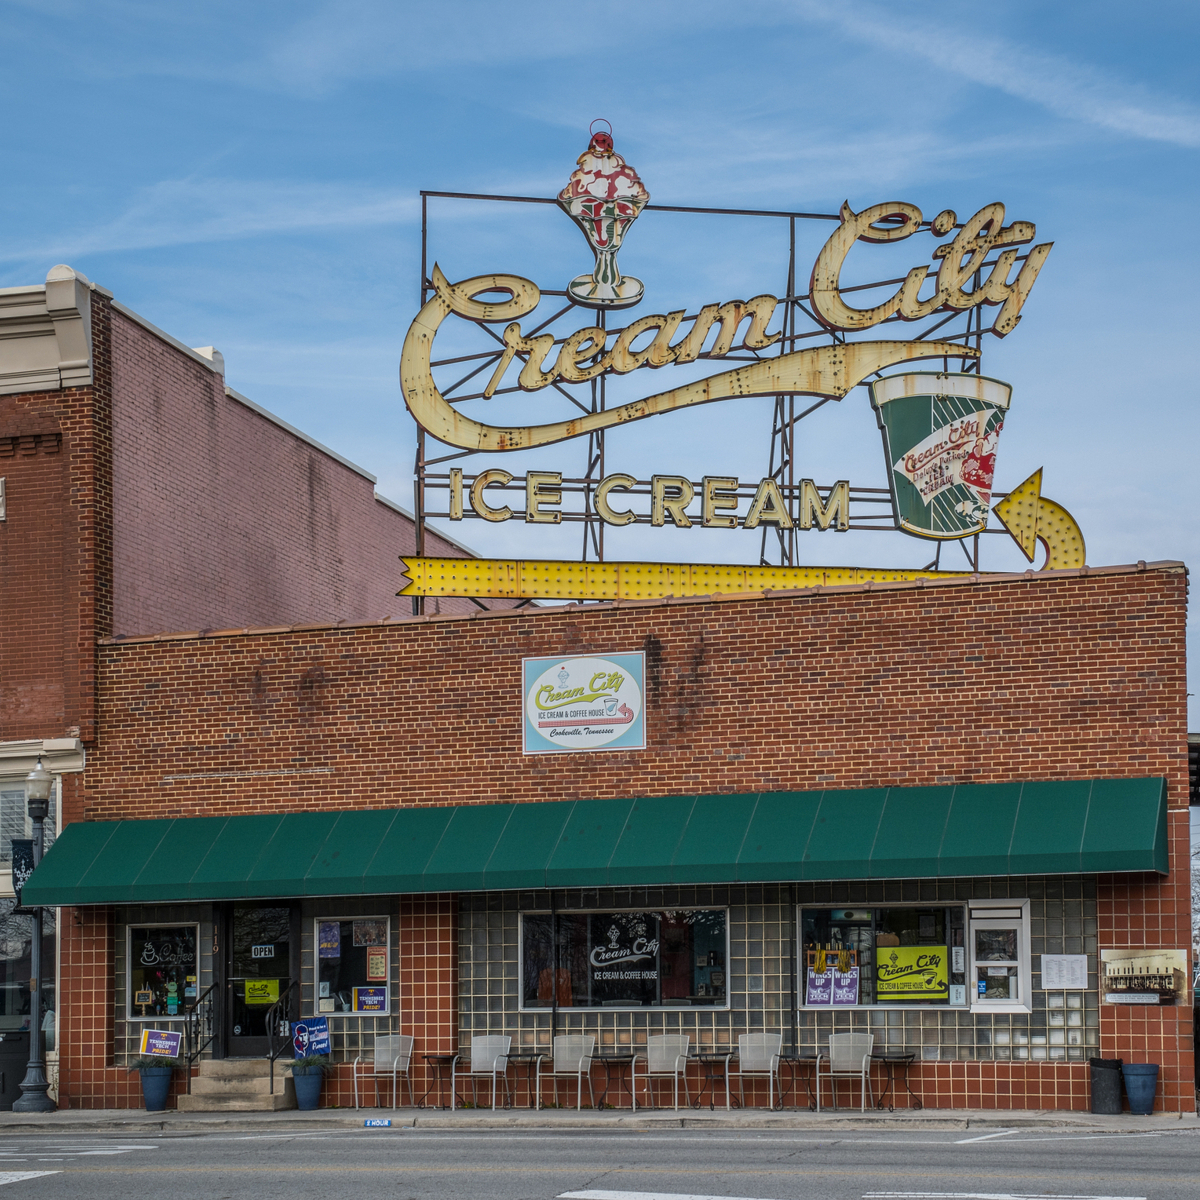 Cool off this #summer with a #sweettreat from Cream City Ice Cream & Coffee. Just look for the iconic neon sign that illuminates the Westside of Cookeville. This family-owned #icecreamshop offers over 40 unique flavors and signature #coffee. bit.ly/3C8p13g